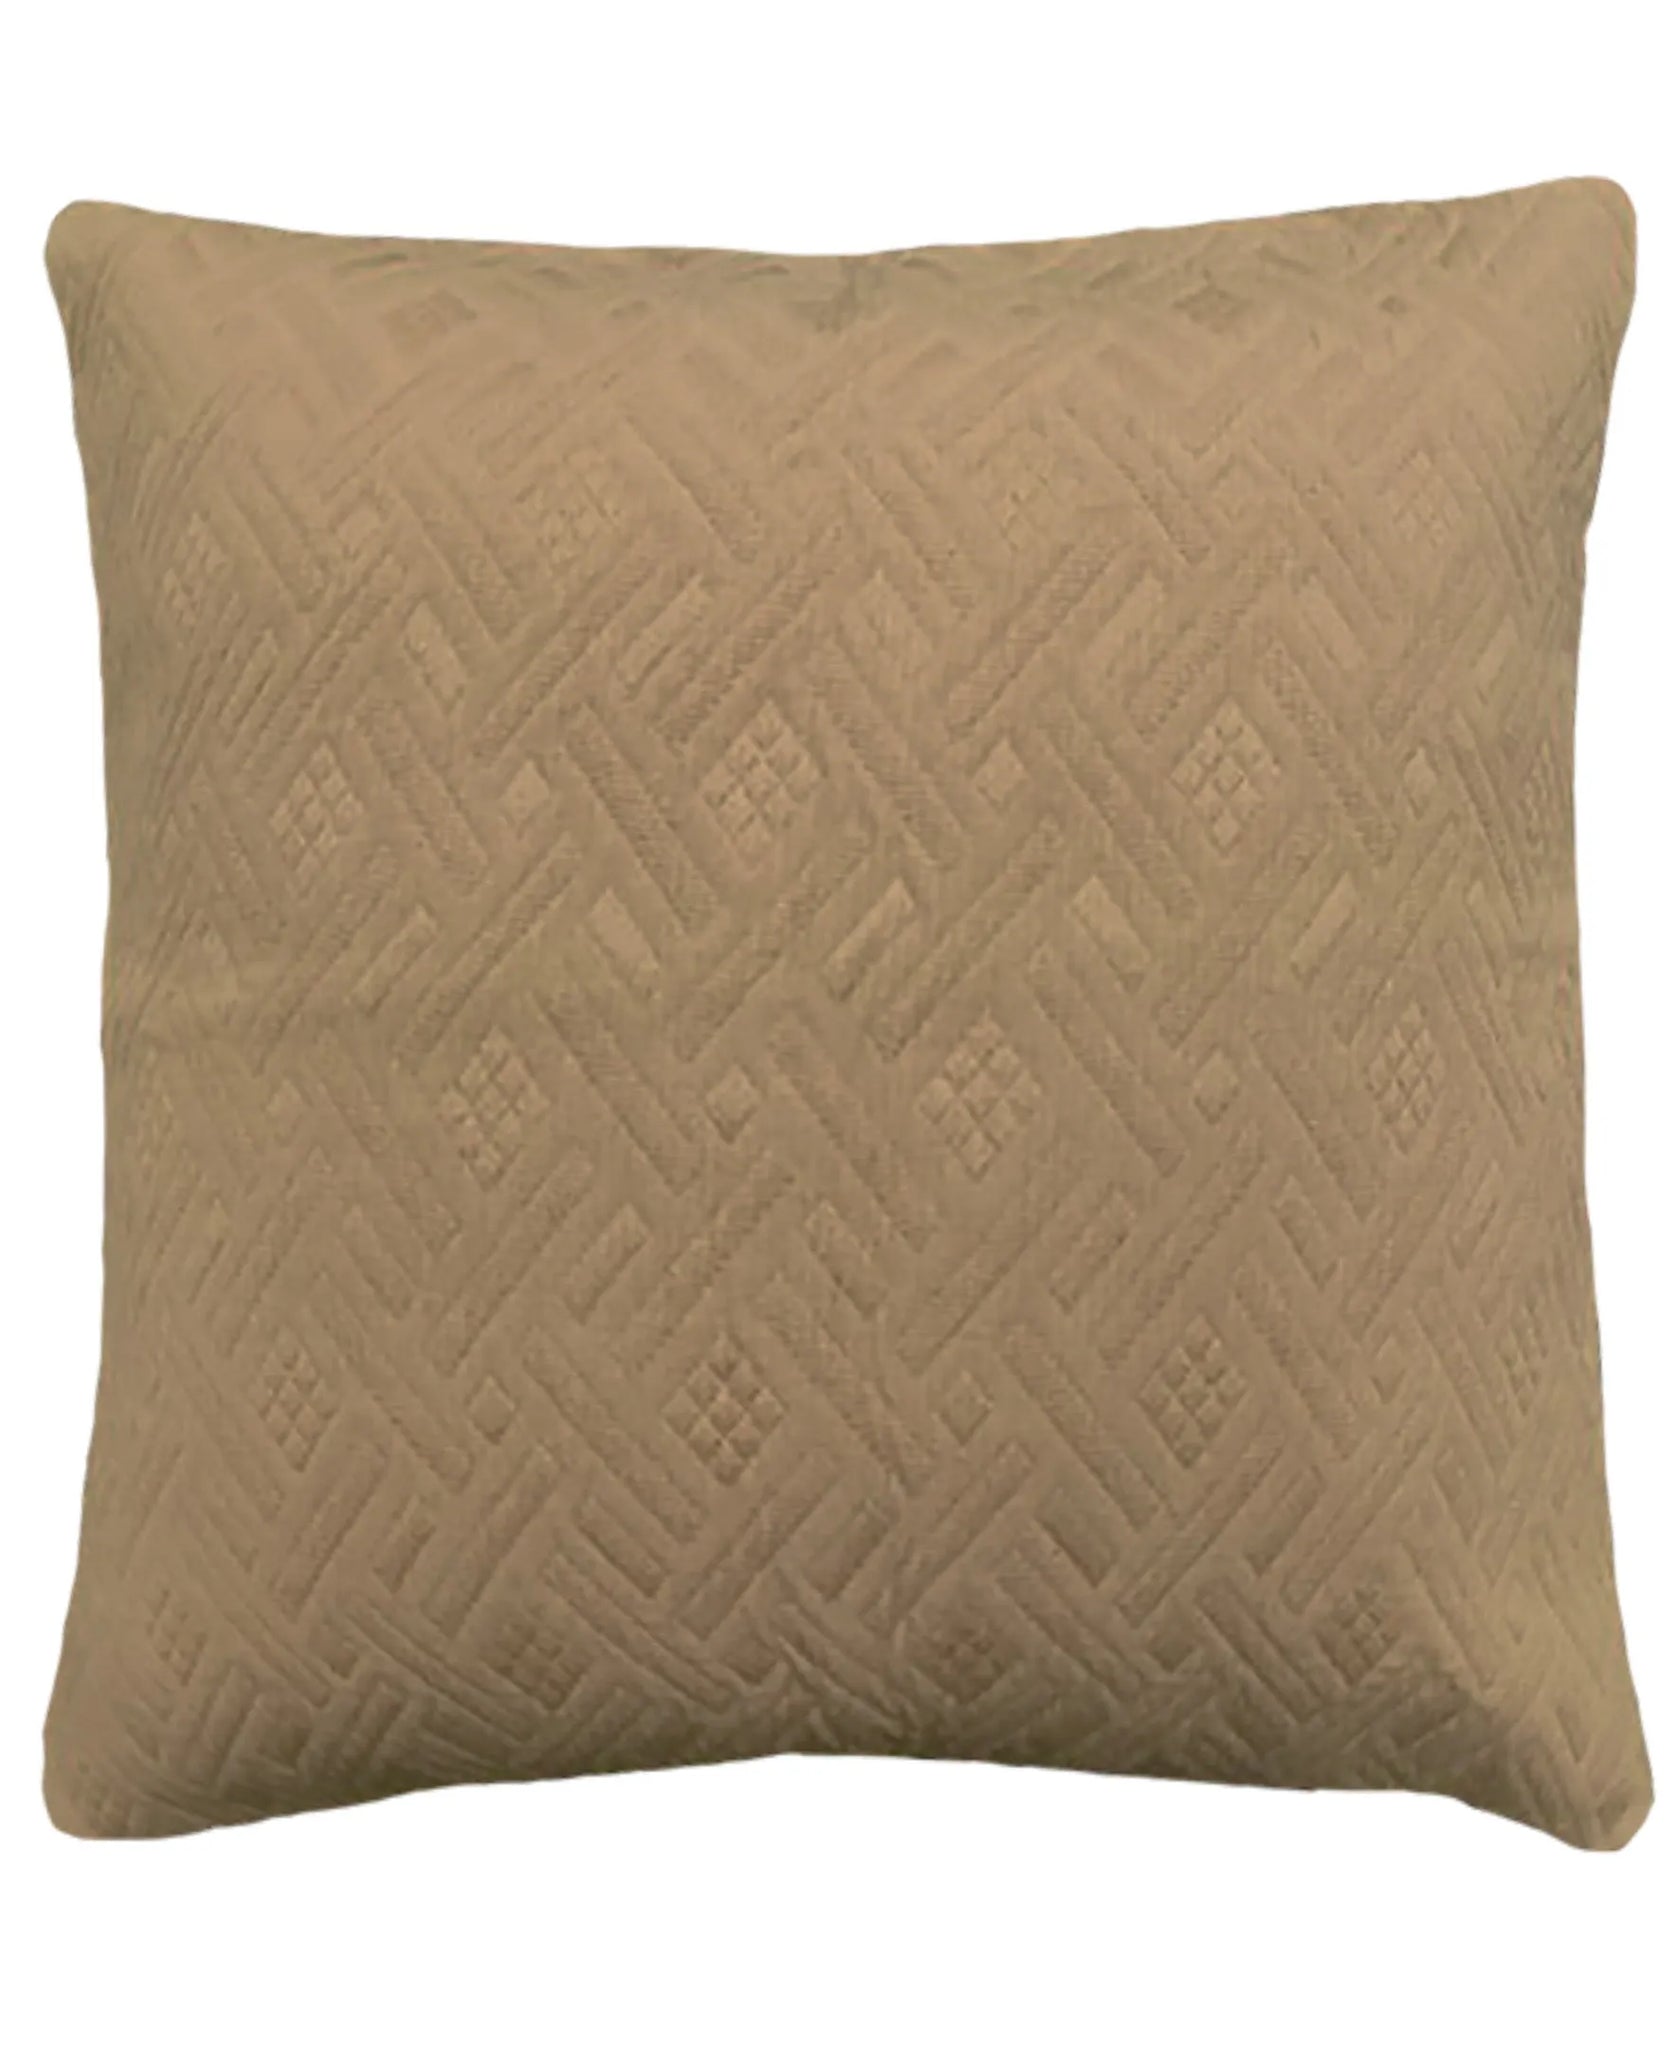 Quilted Diamond Textured Decorative Pillow, 20" X 20" home decor - Mod Lifestyles